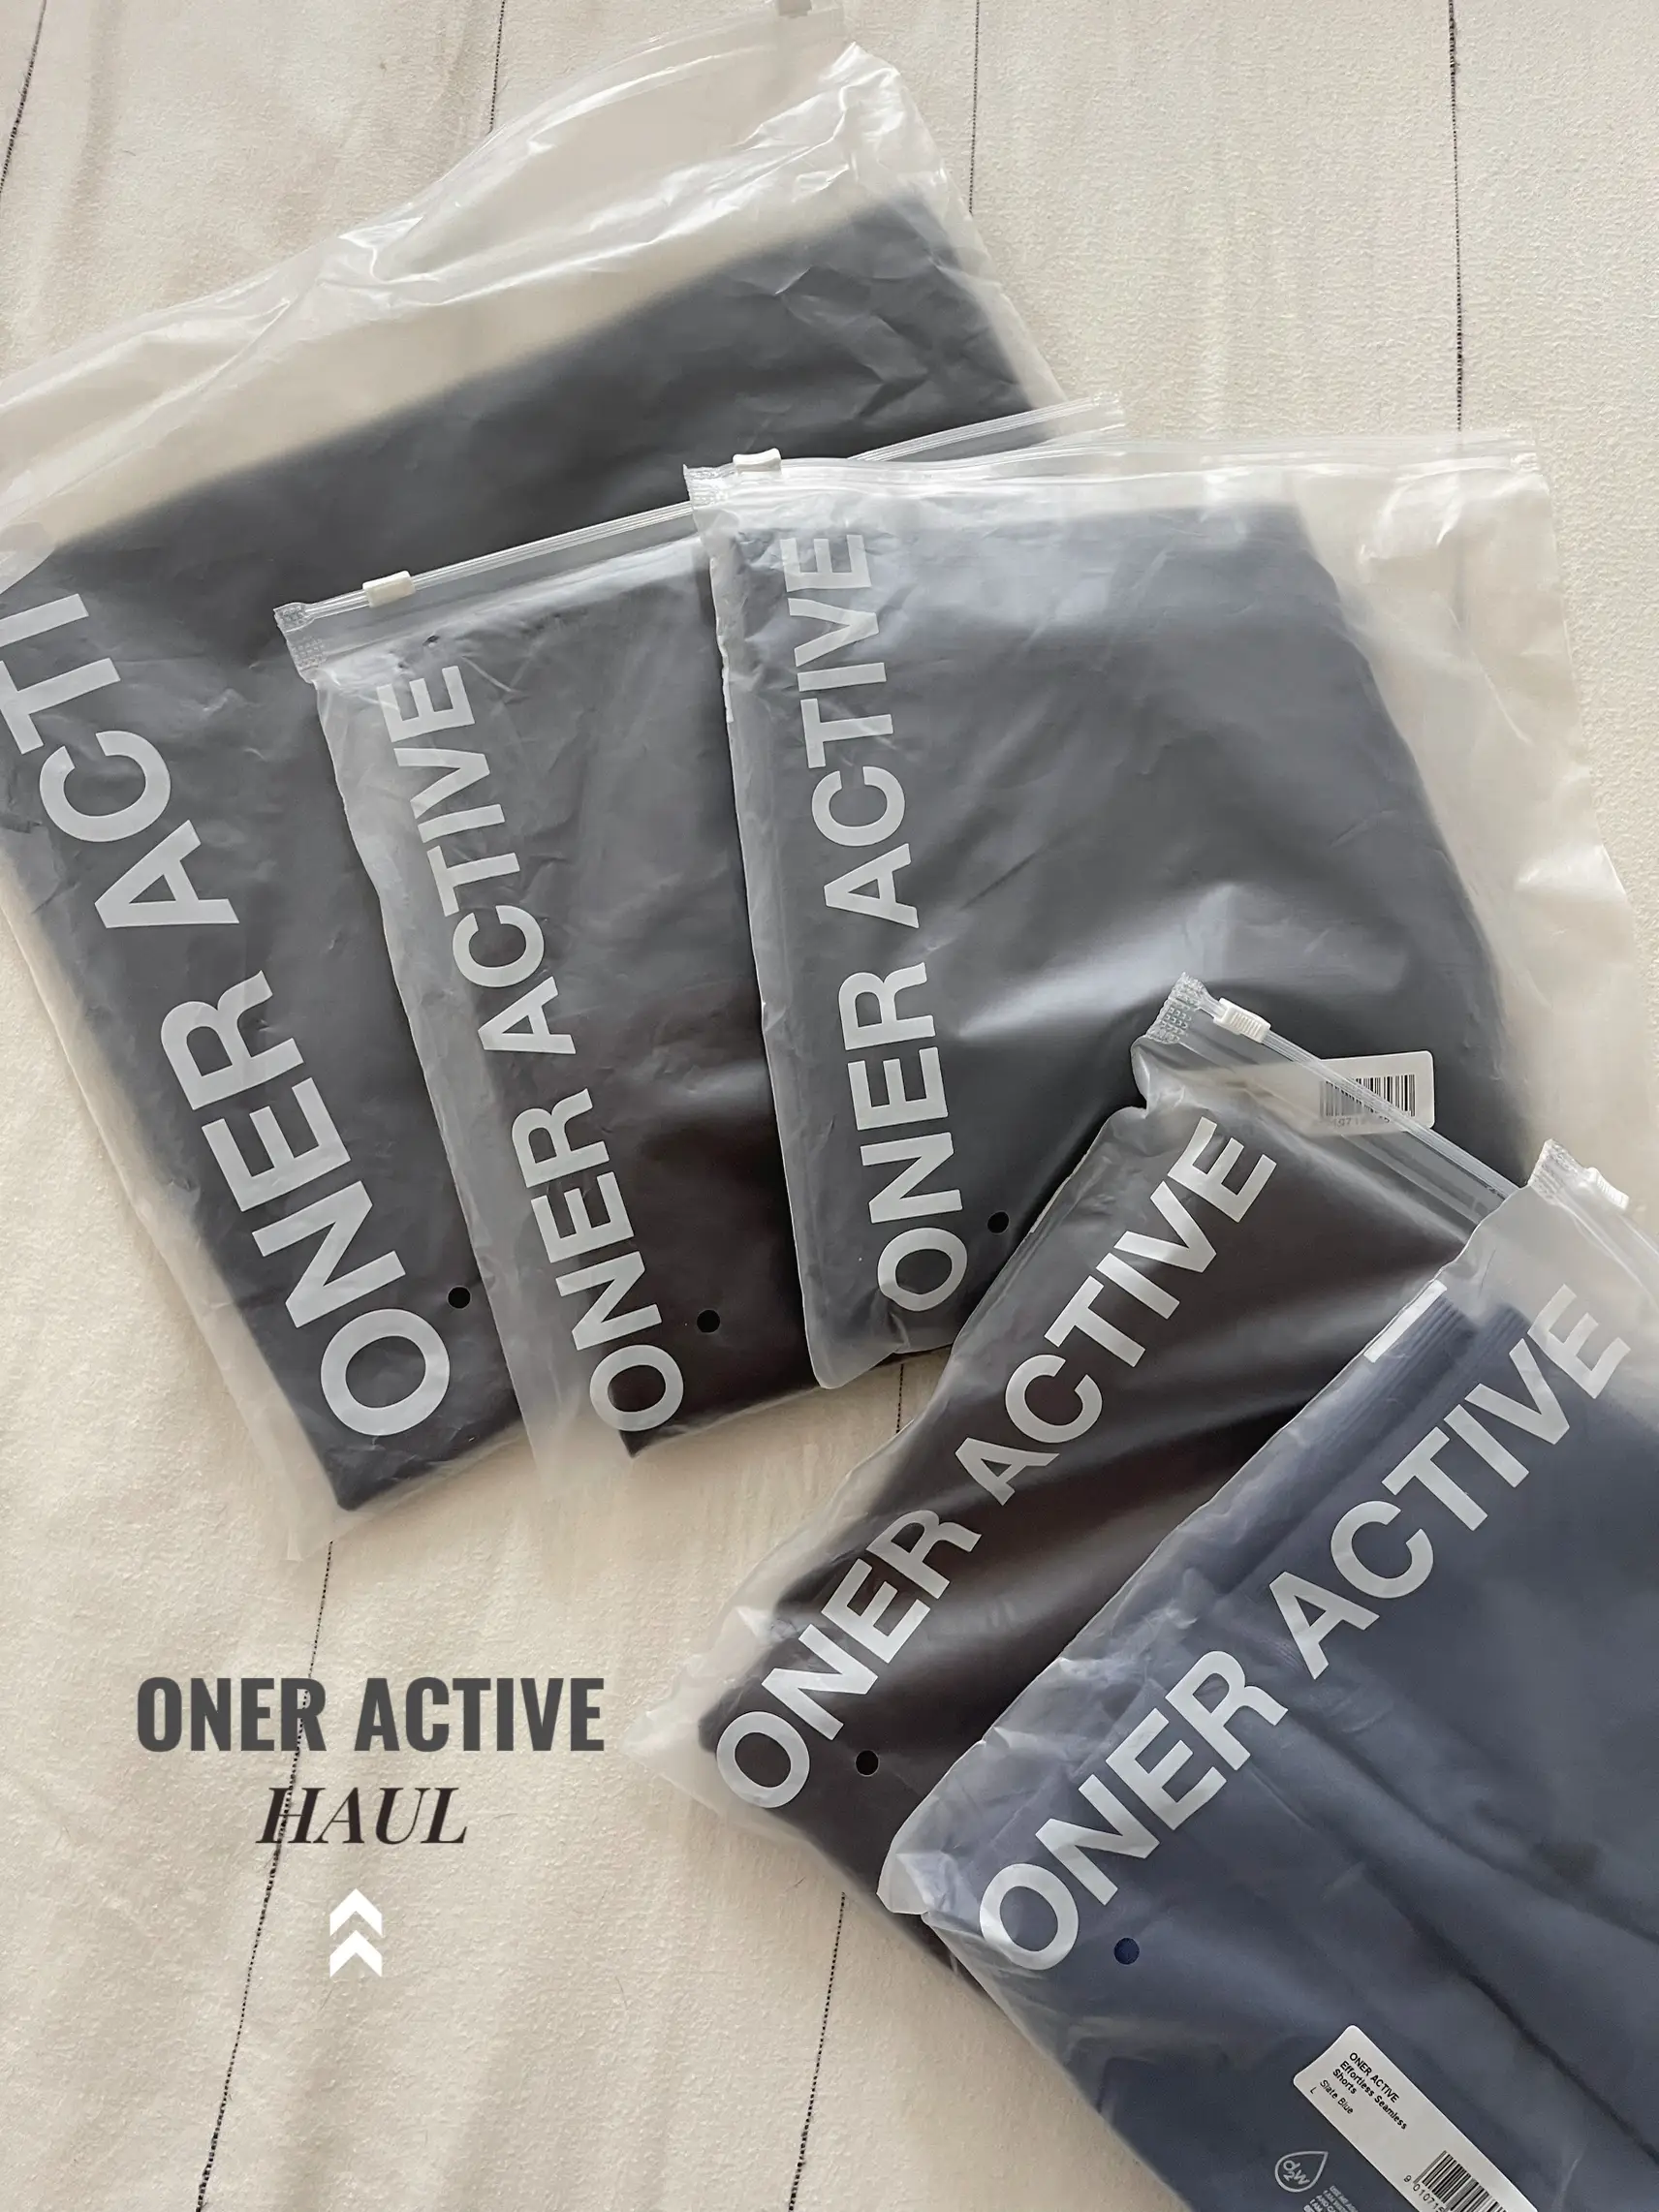 oner active tees dupes｜TikTok Search